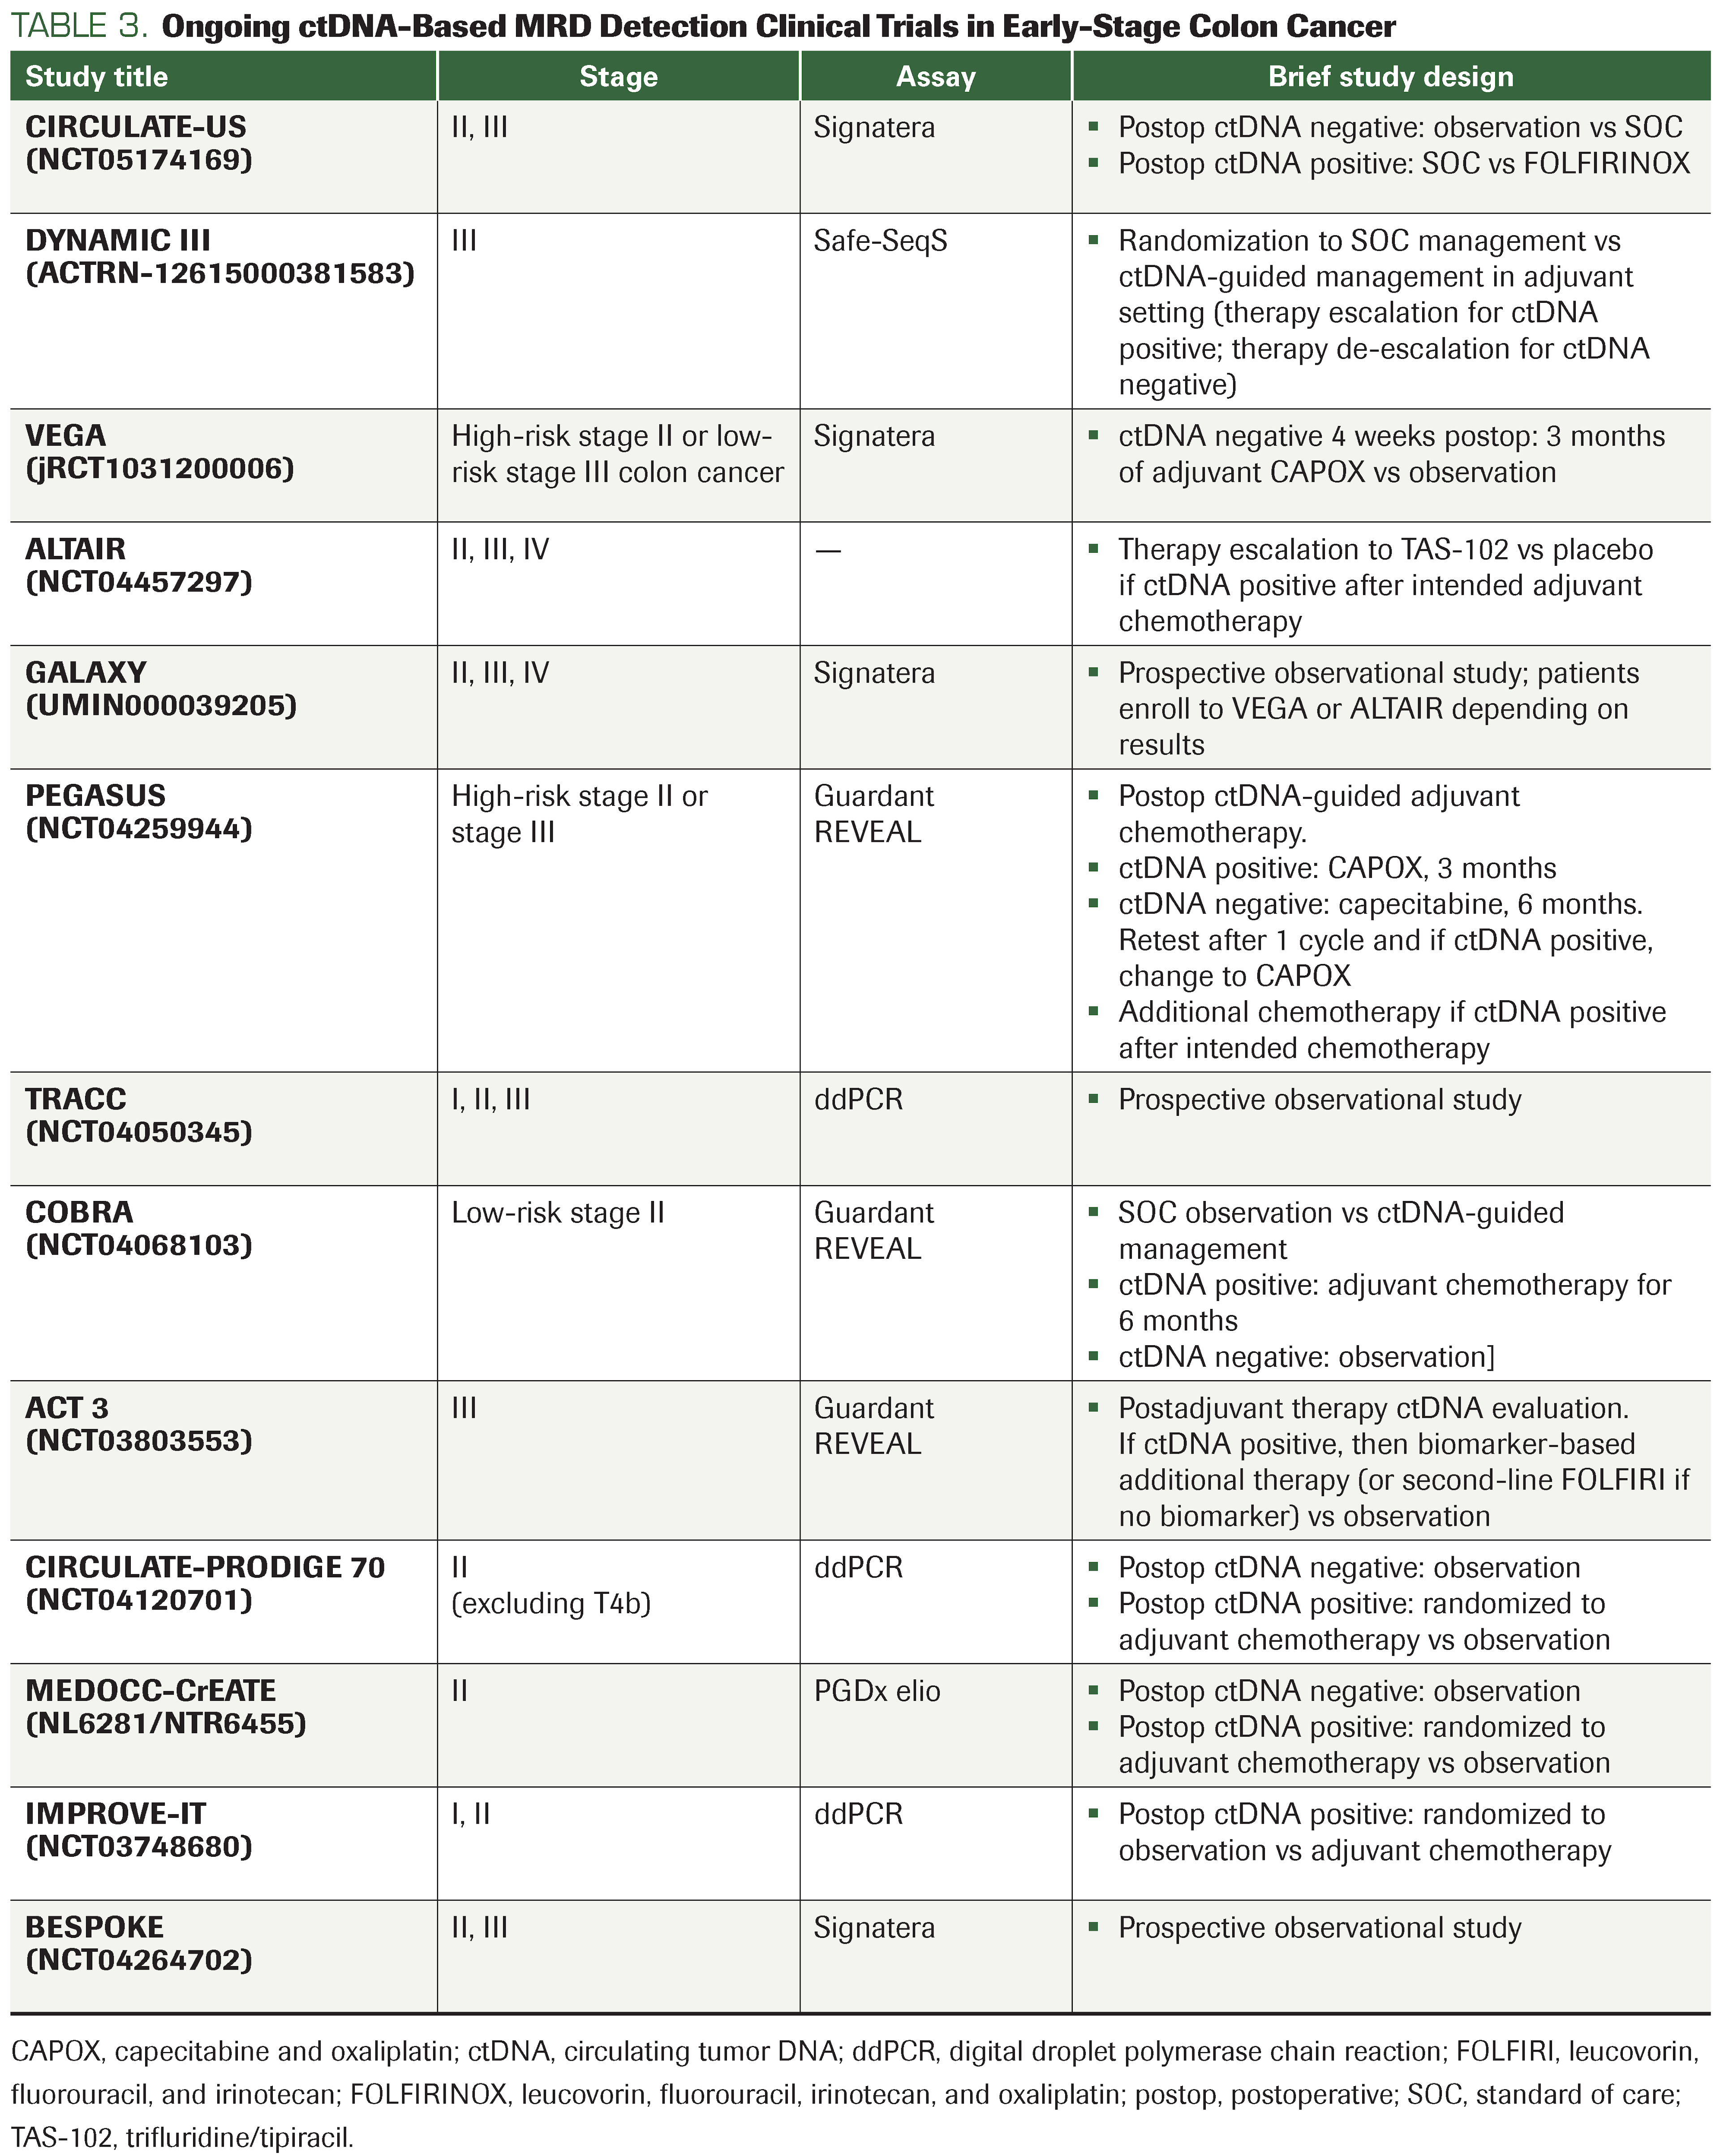 TABLE 3. Ongoing ctDNA-Based MRD Detection Clinical Trials in Early-Stage Colon Cancer